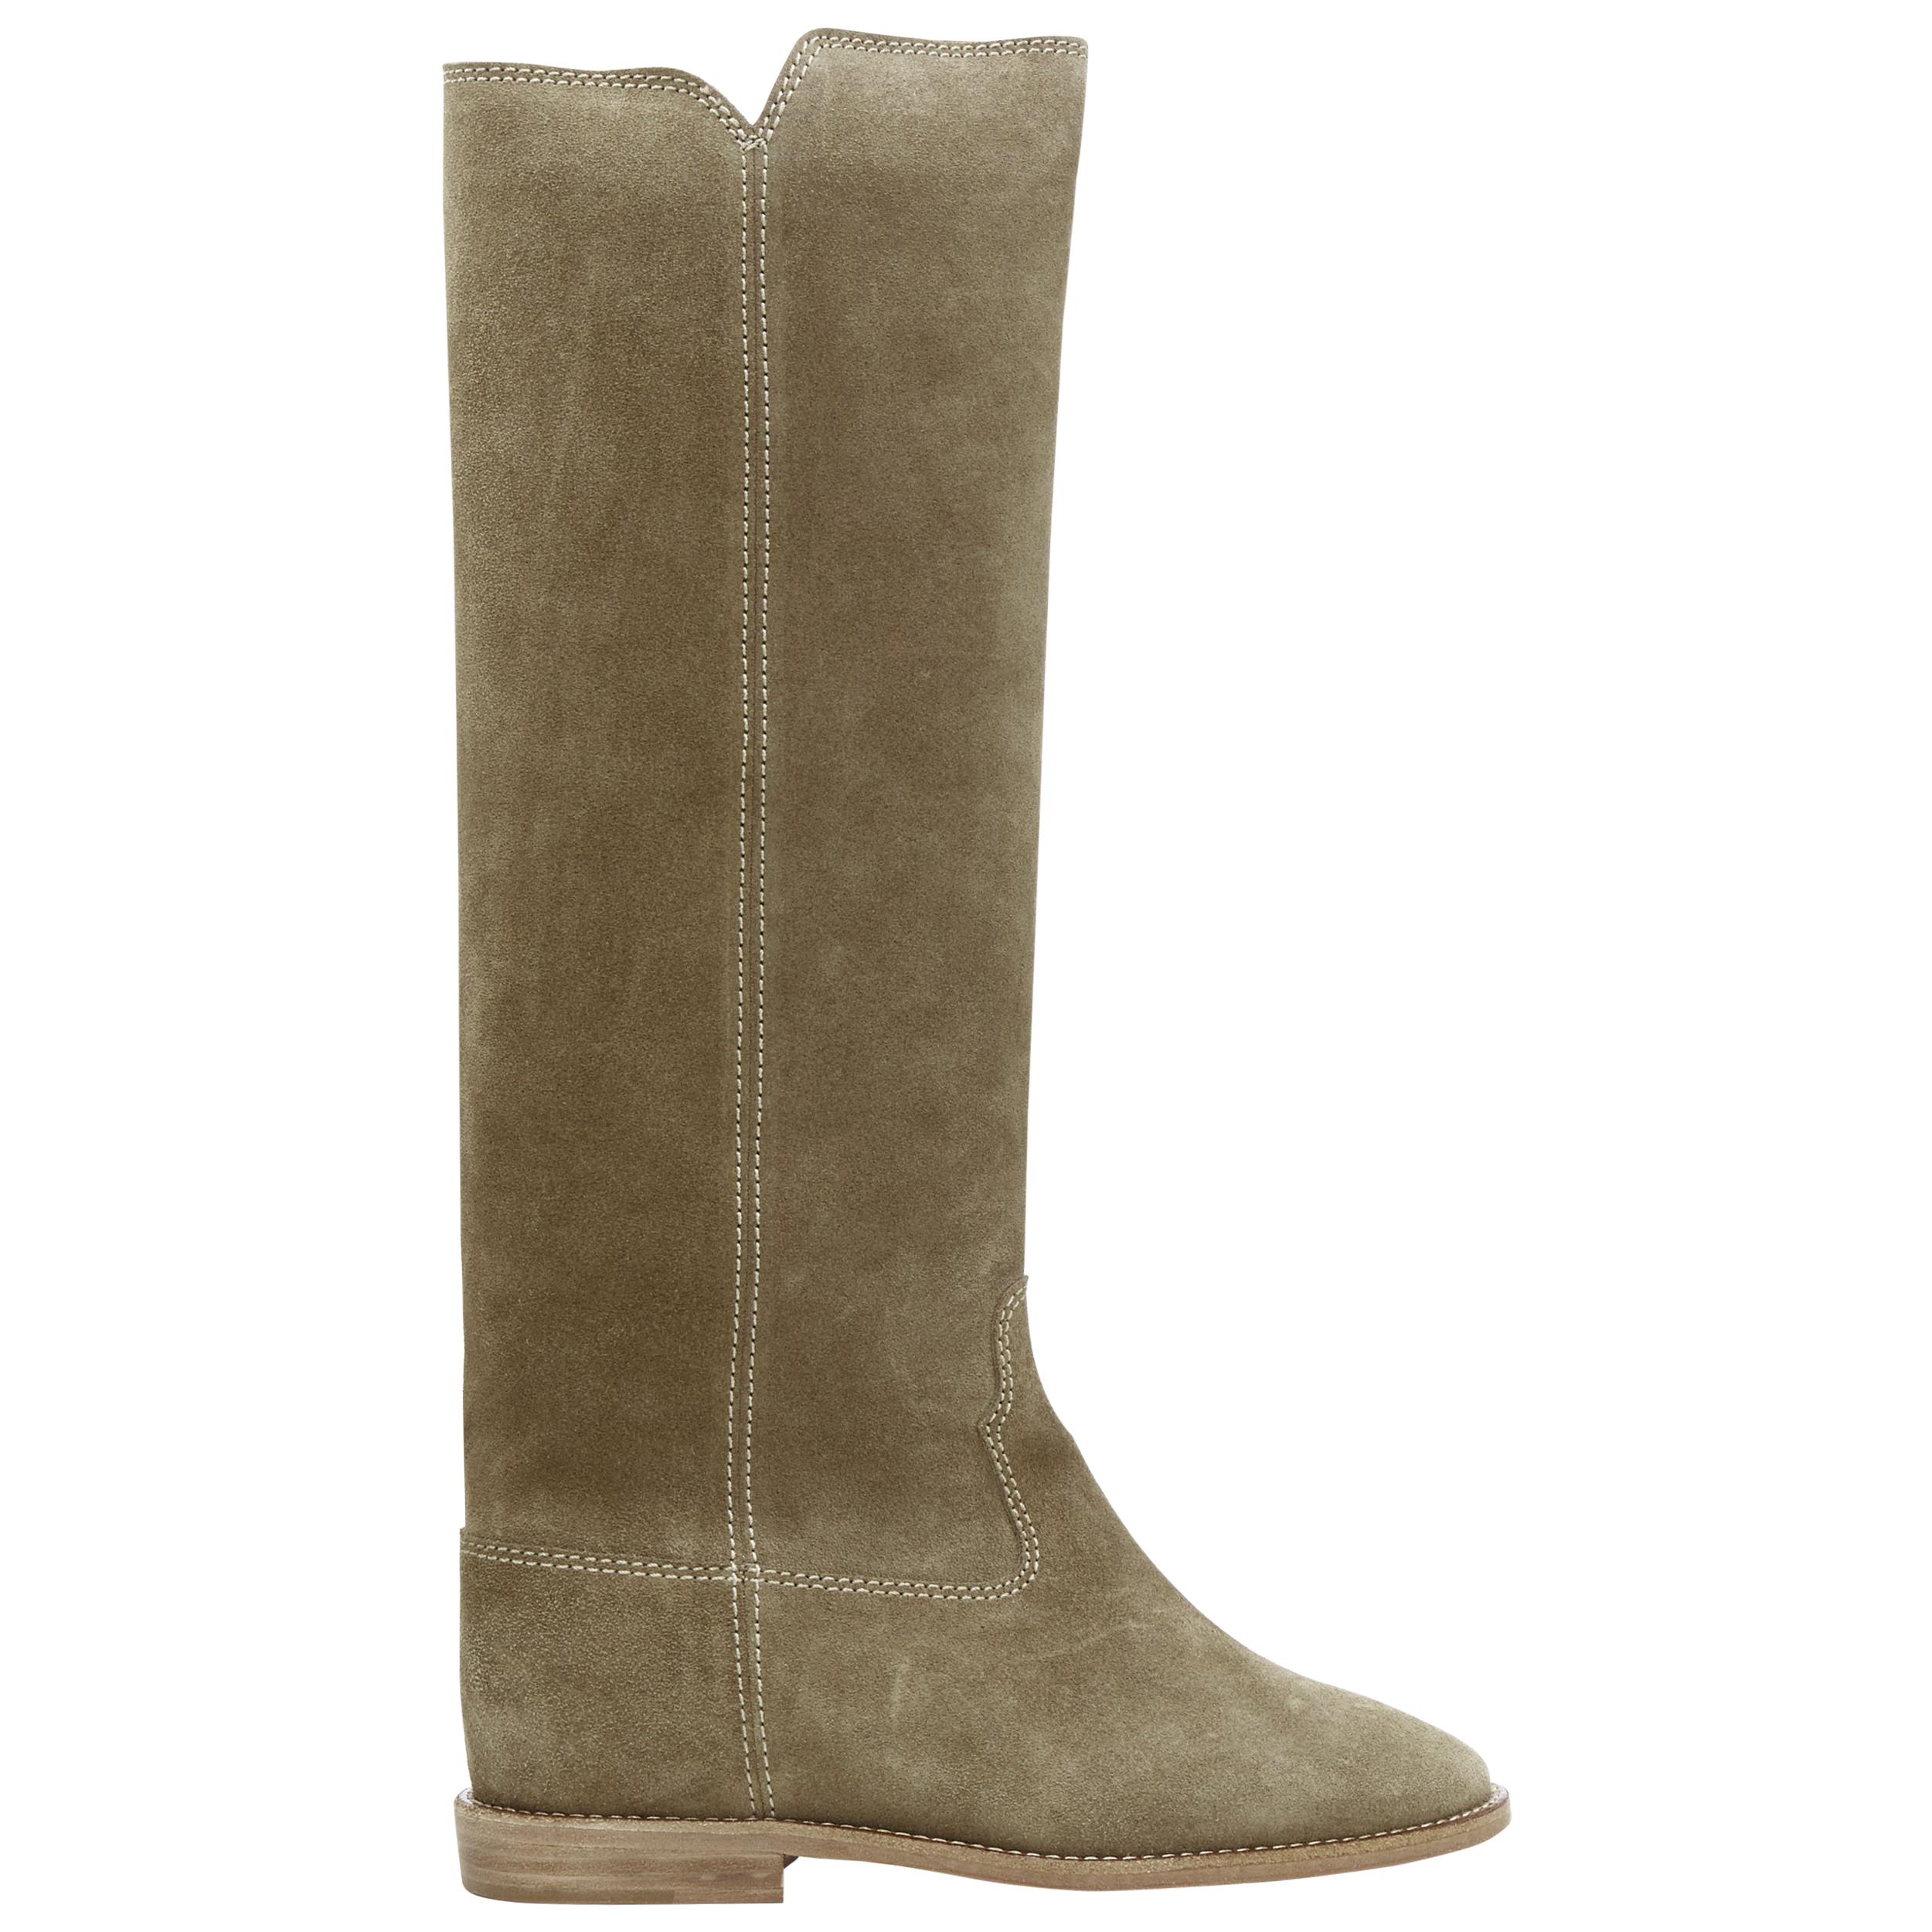 new ISABEL MARANT Cleave Taupe suede concealed wedge knee high western boot EU37